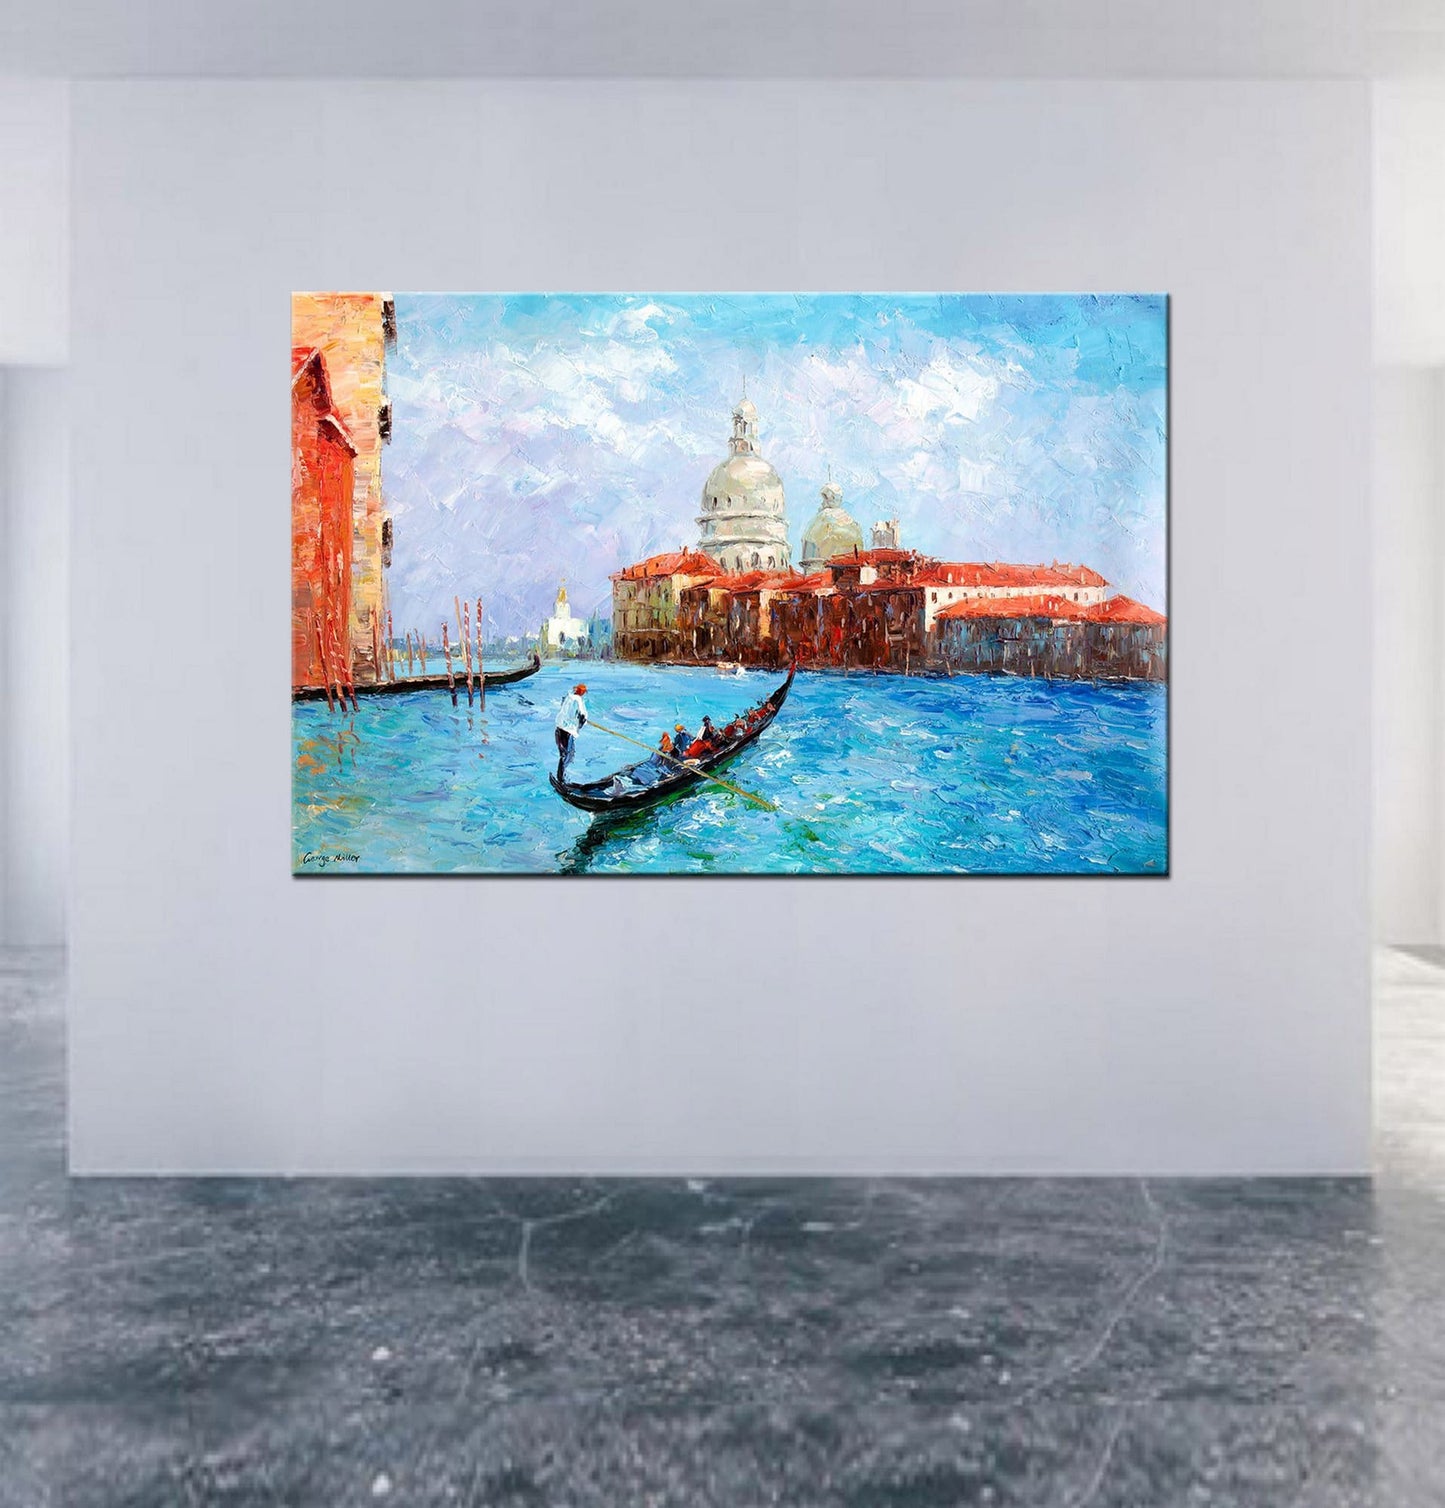 Large Oil Painting Venice Grand Canal Gondora, Canvas Painting, Original Oil Painting Seascape, Large Abstract Art, Palette Knife Art, Blue